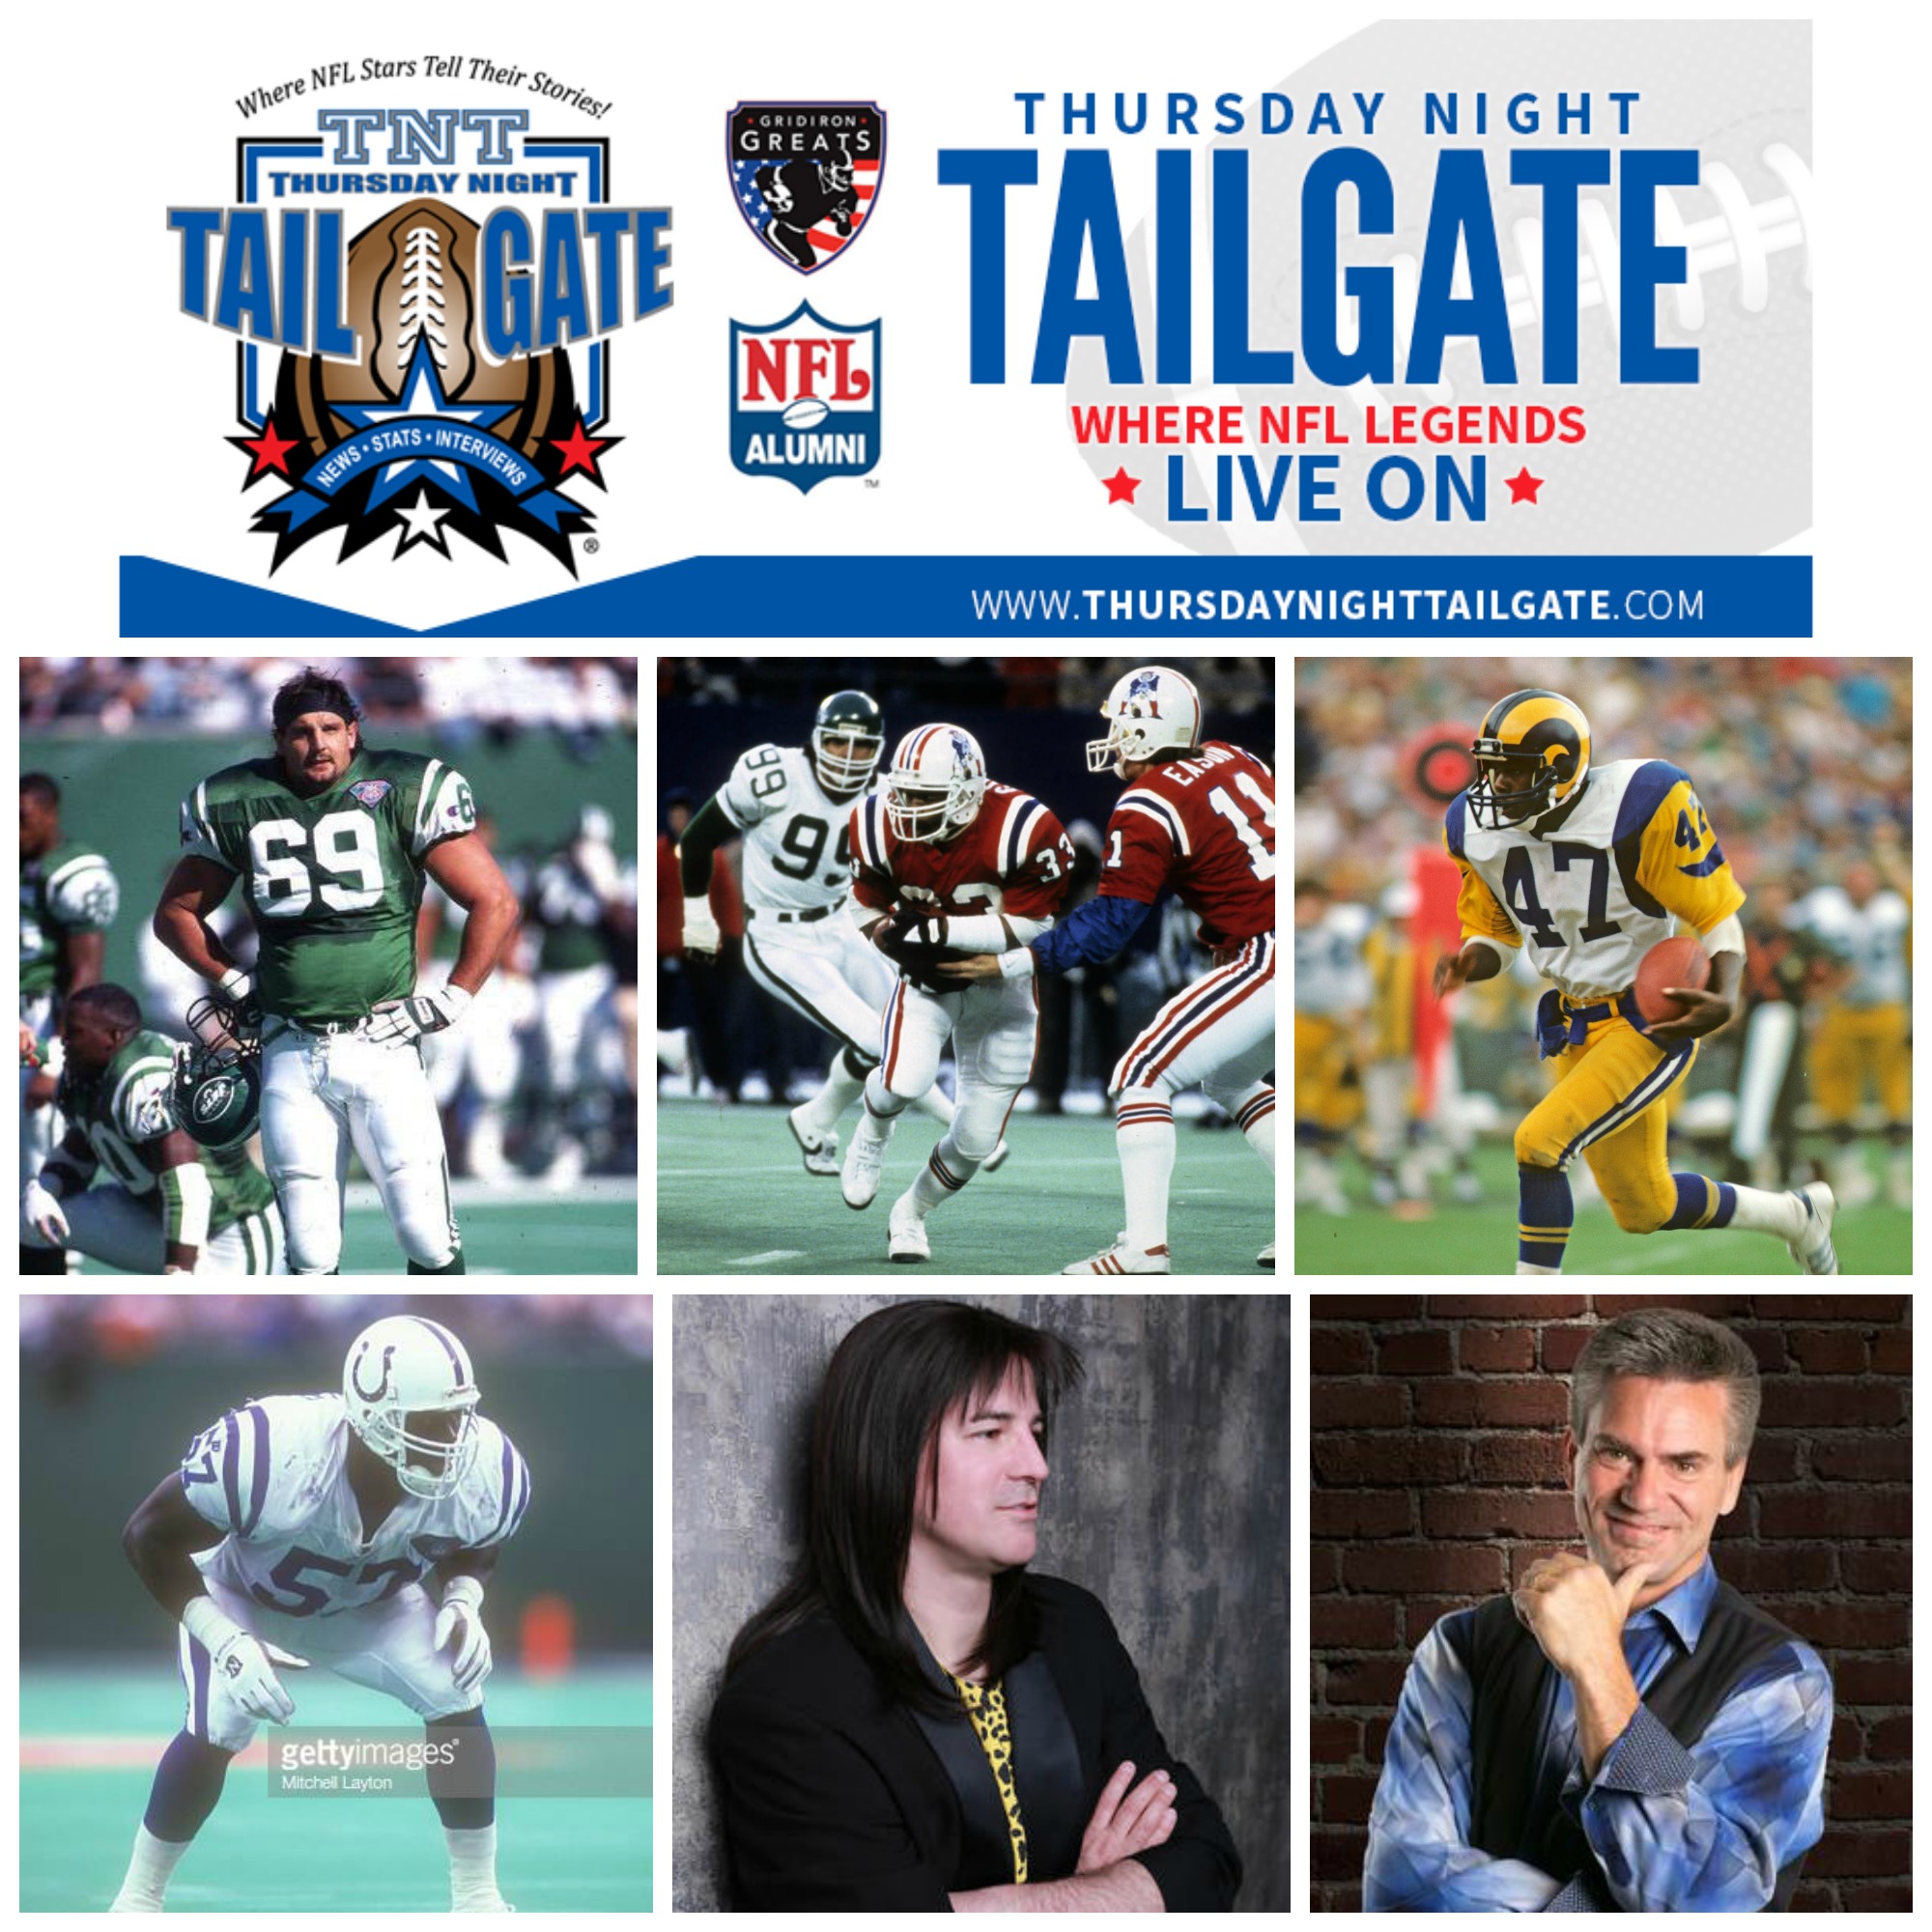 Jeff Criswell, Tony Collins, LeRoy Irvin, Devon McDonald plus Ryan Christopher & Vic White of the band Resurrection join us on Thursday Night Tailgate, NFL Podcast Edition